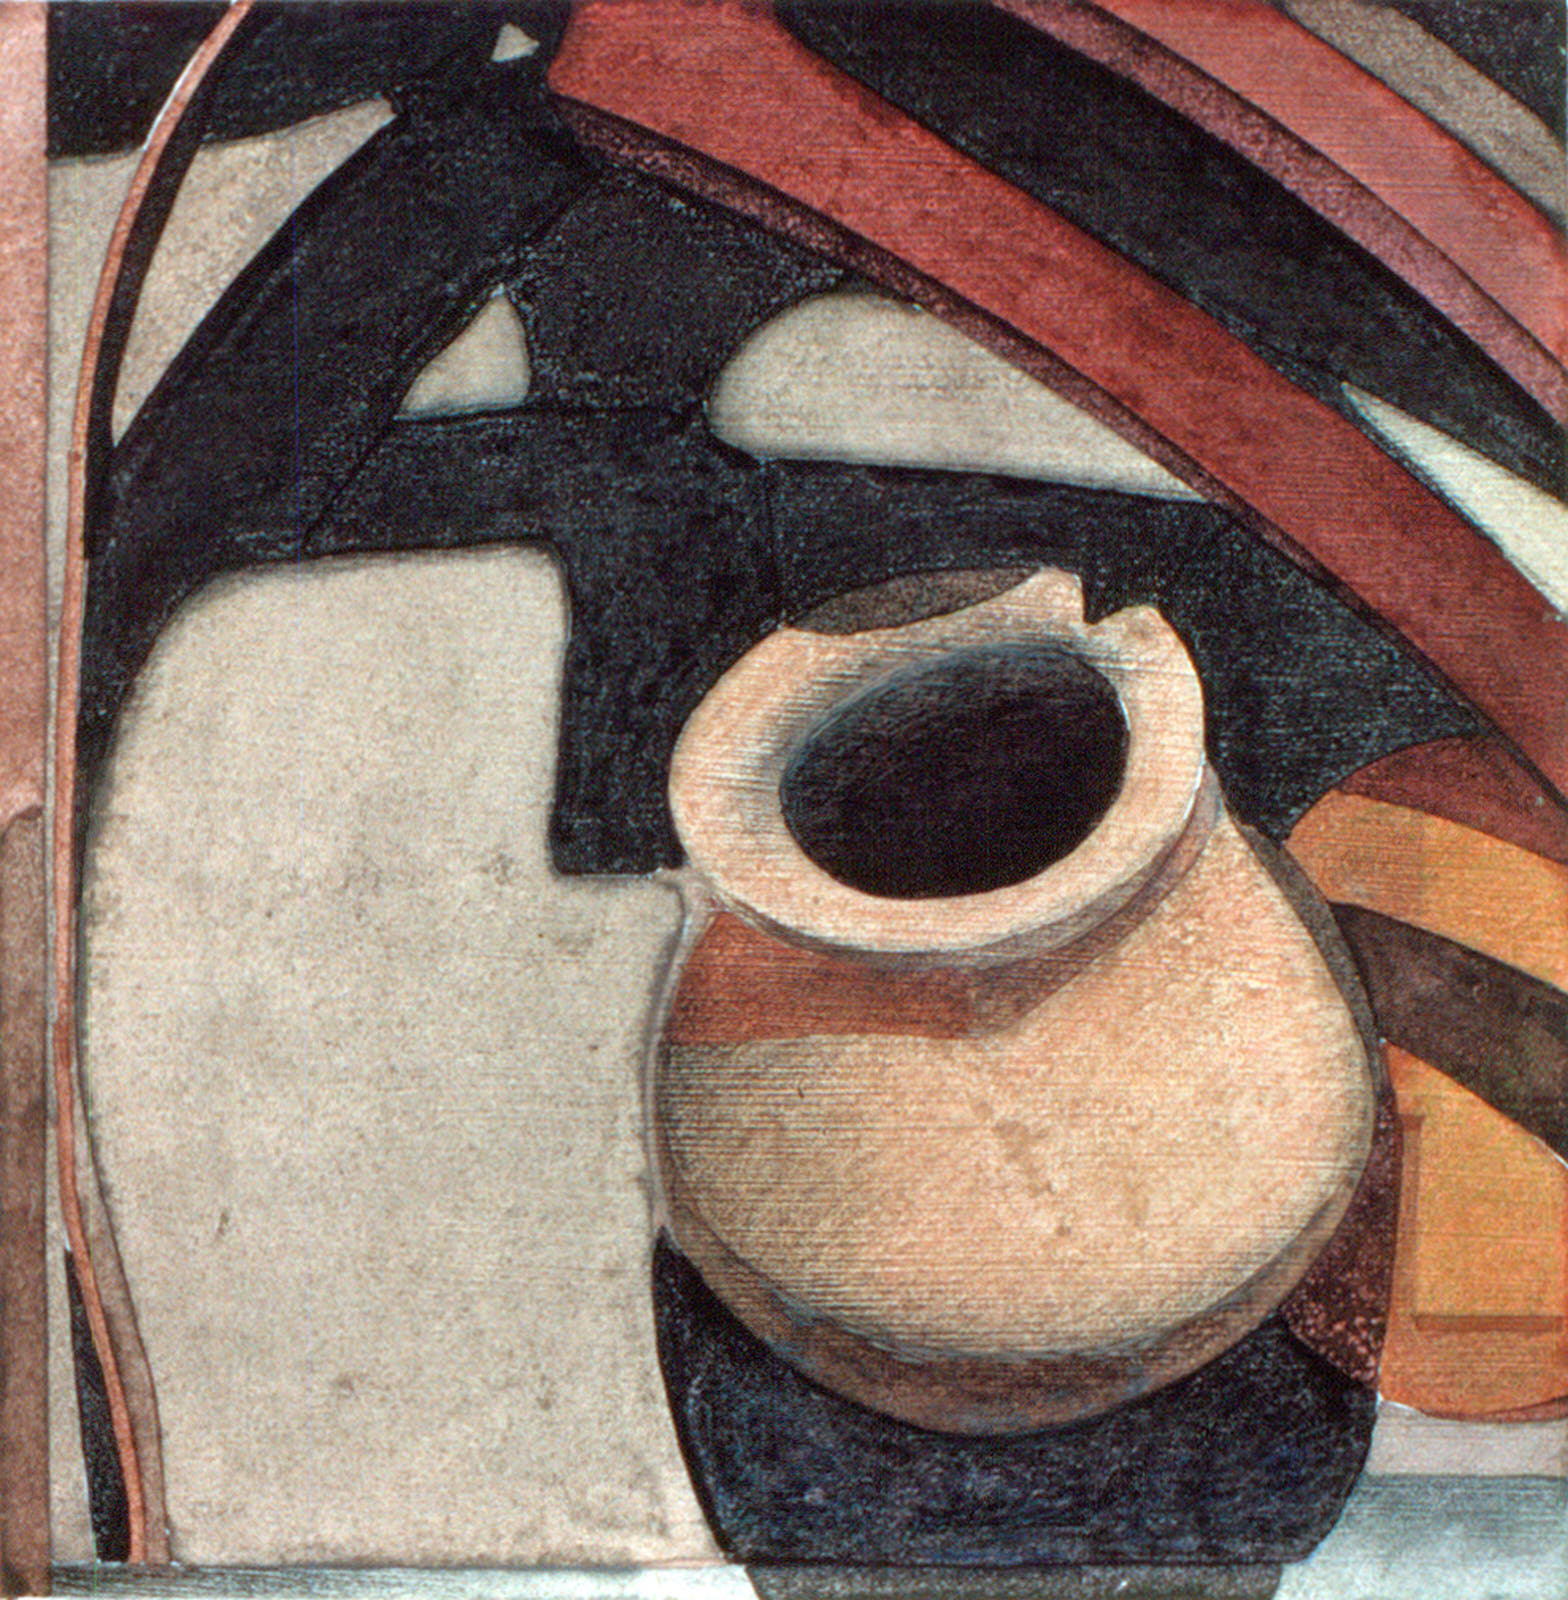 Still Life with Clay Pot  #1, 1995 gouache on paper. 11 x 11'' private collection